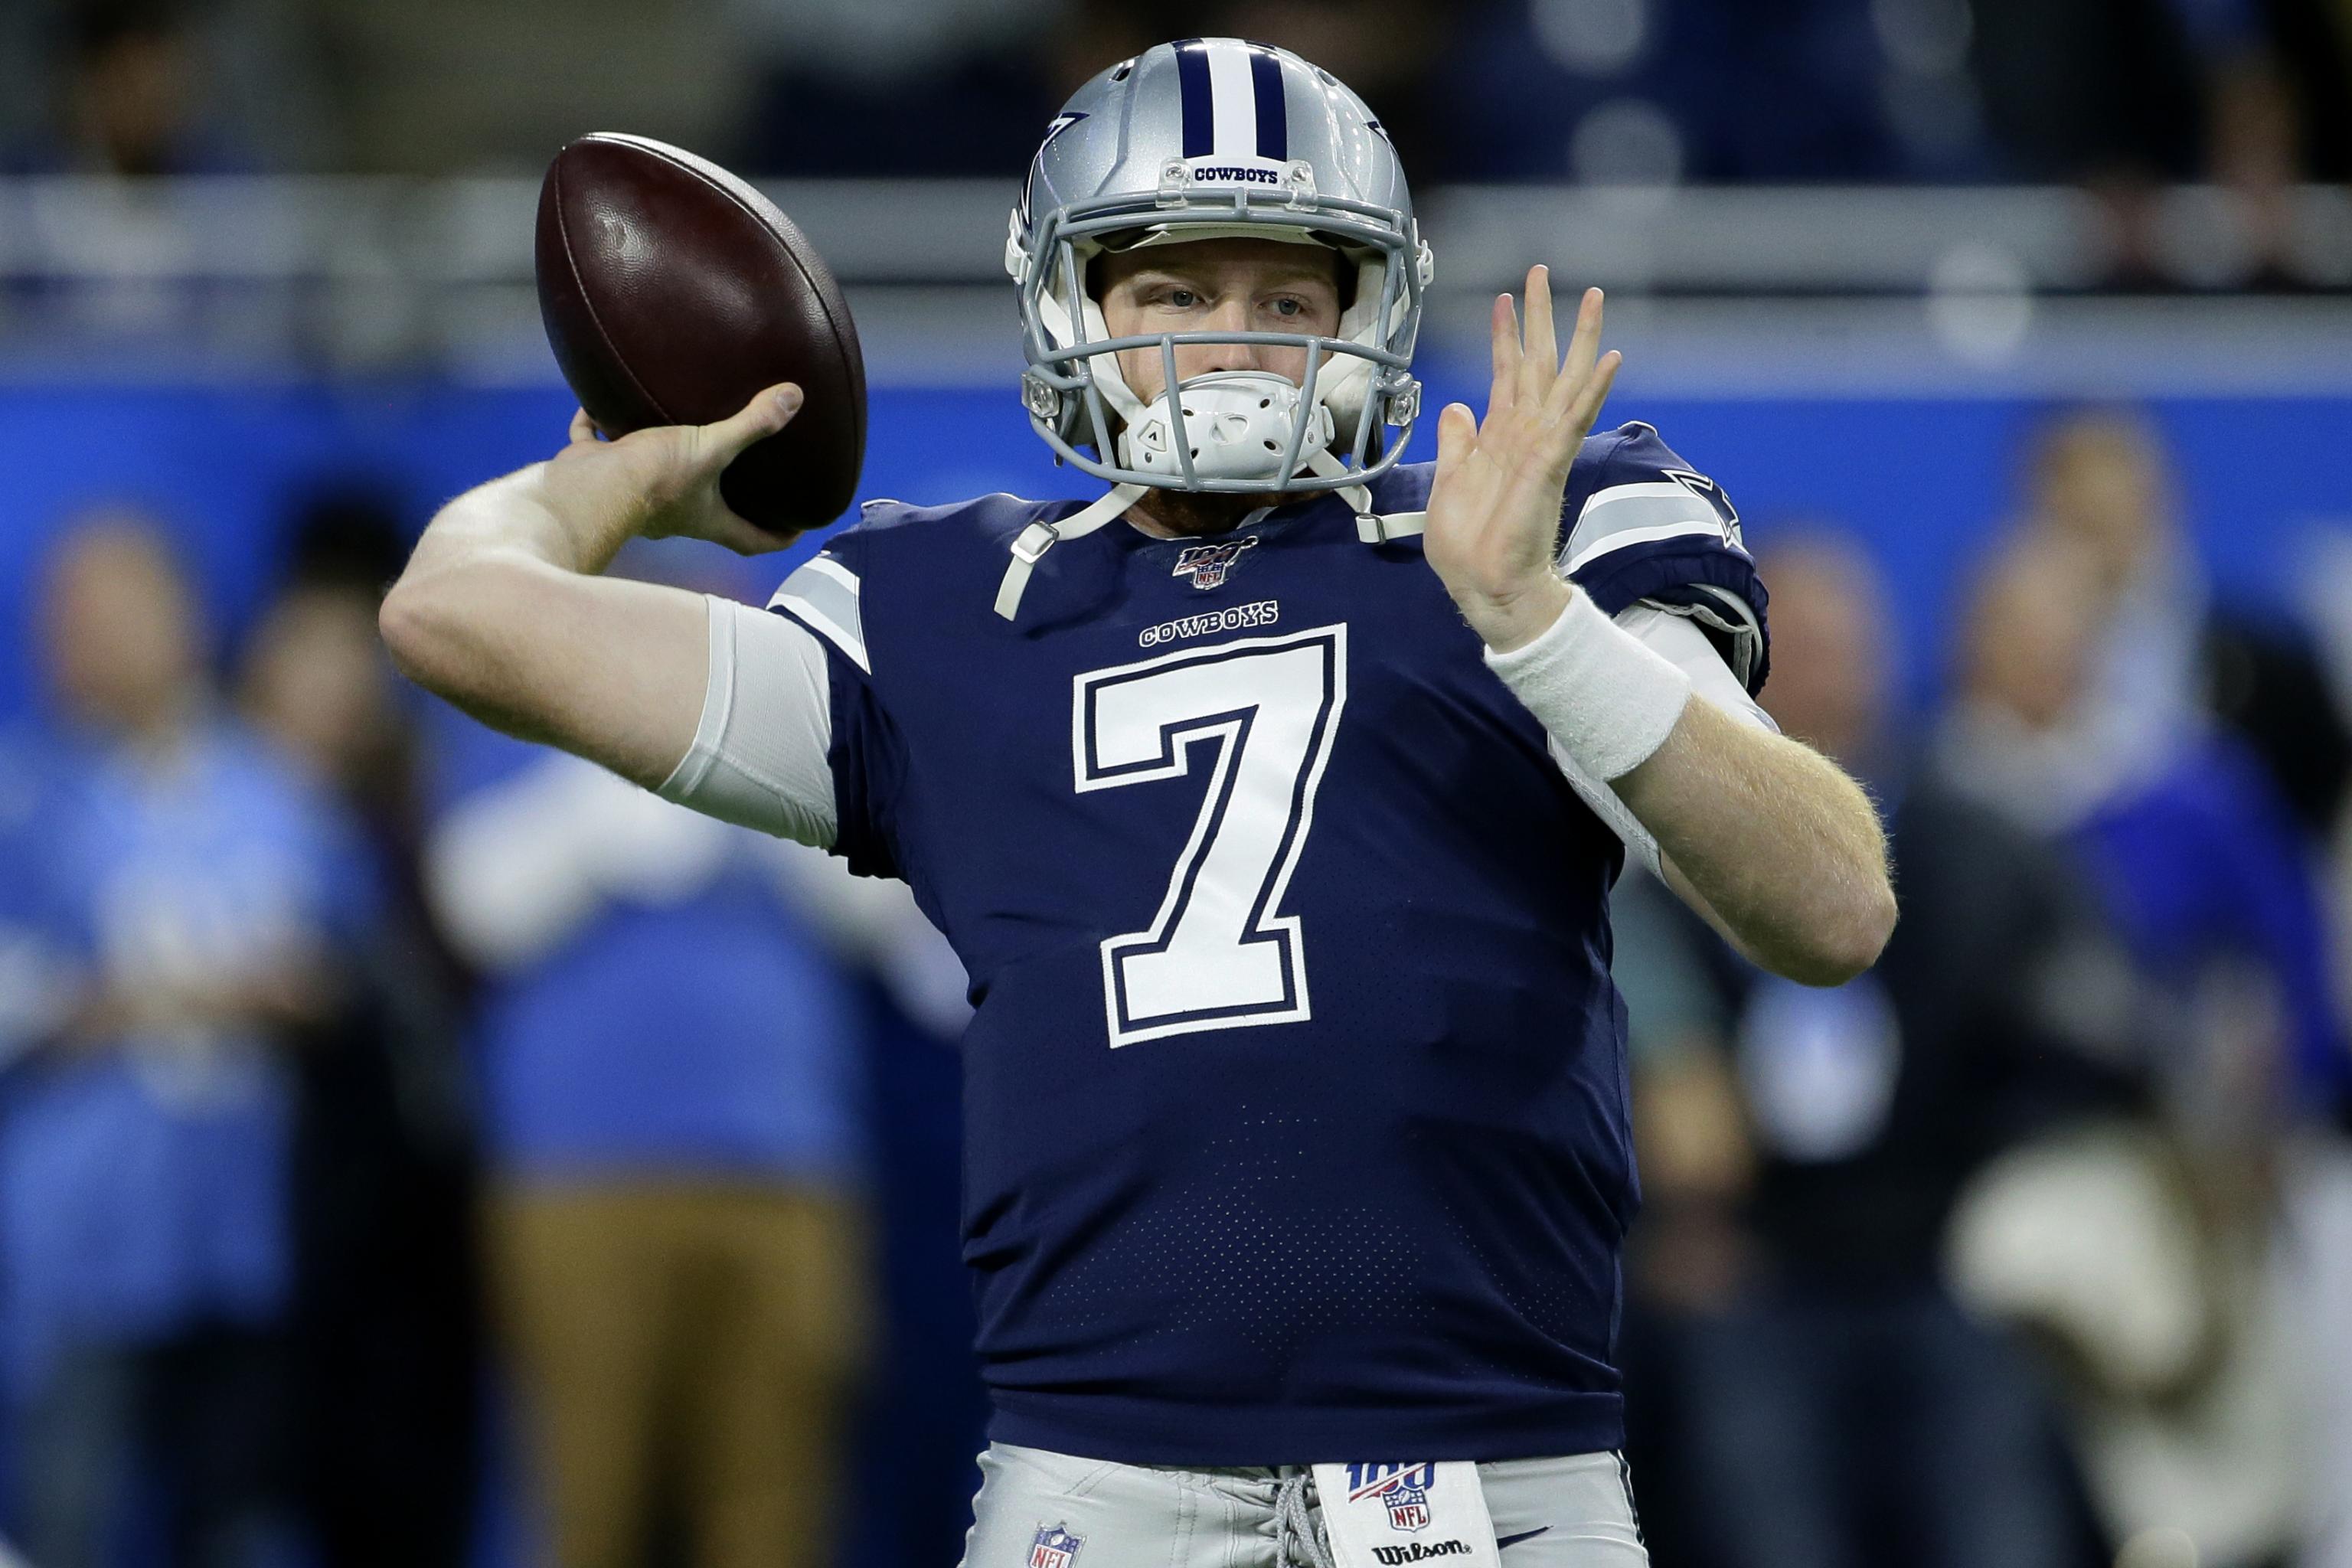 Cooper Rush has not failed the Cowboys, he's left them in a better